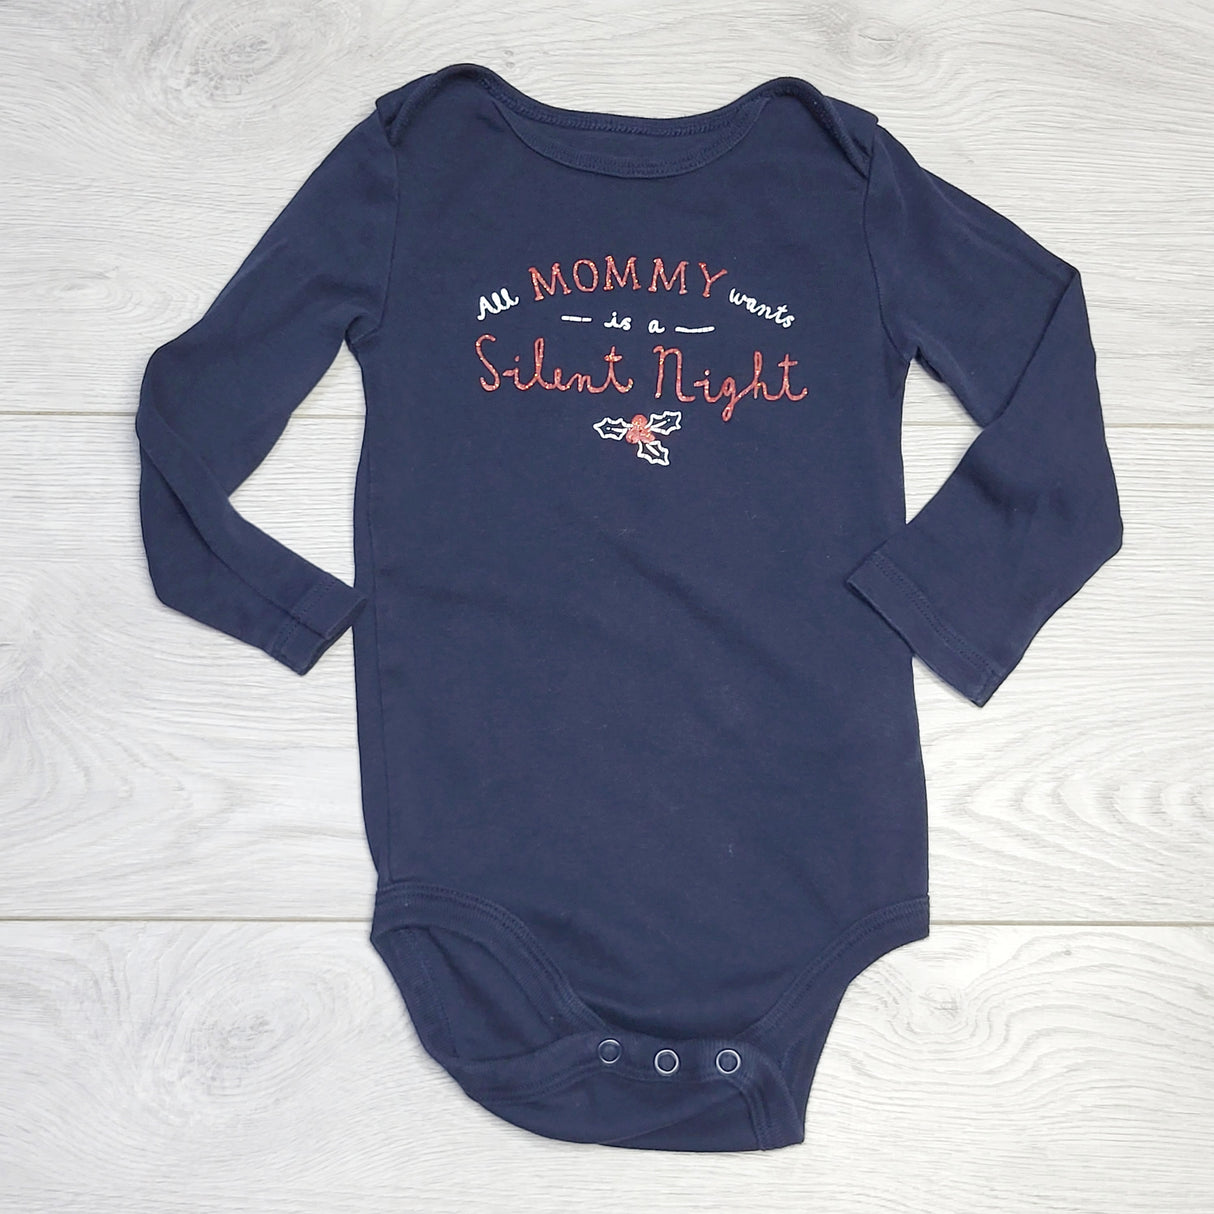 RZA2 - Joe navy "All Mommy Wants is a Silent Night" onesie. Size 12-18 months